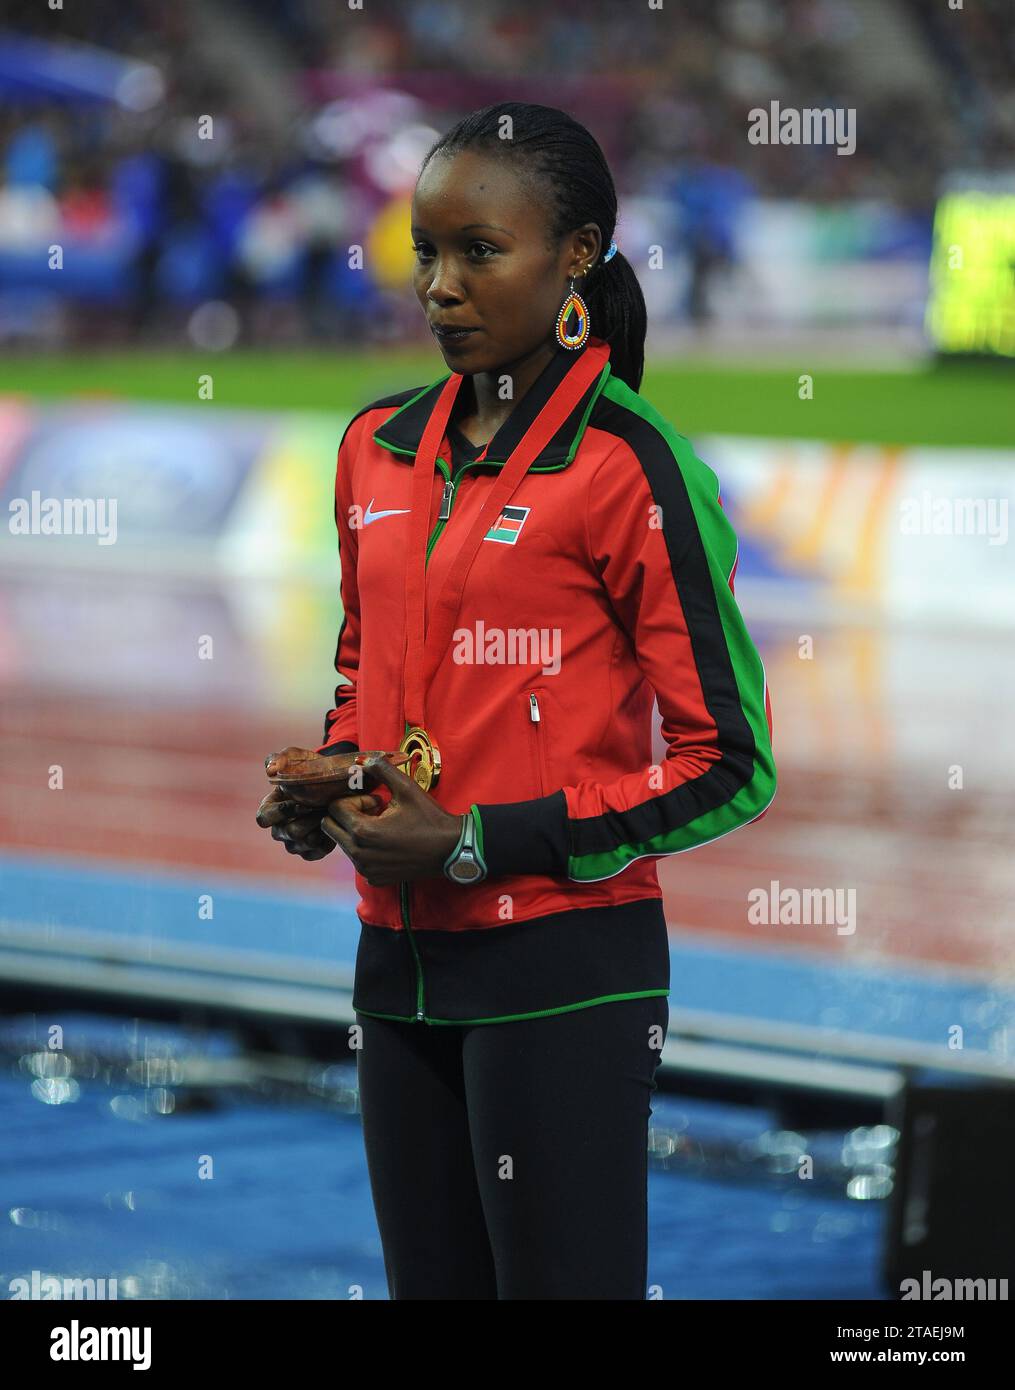 Mercy Cherono of Kenya gold medal ceremony at the women’s 5000m at the Commonwealth Games, Glasgow, Scotland UK on the 27th Jul-2nd Aug 2014. Photo by Stock Photo